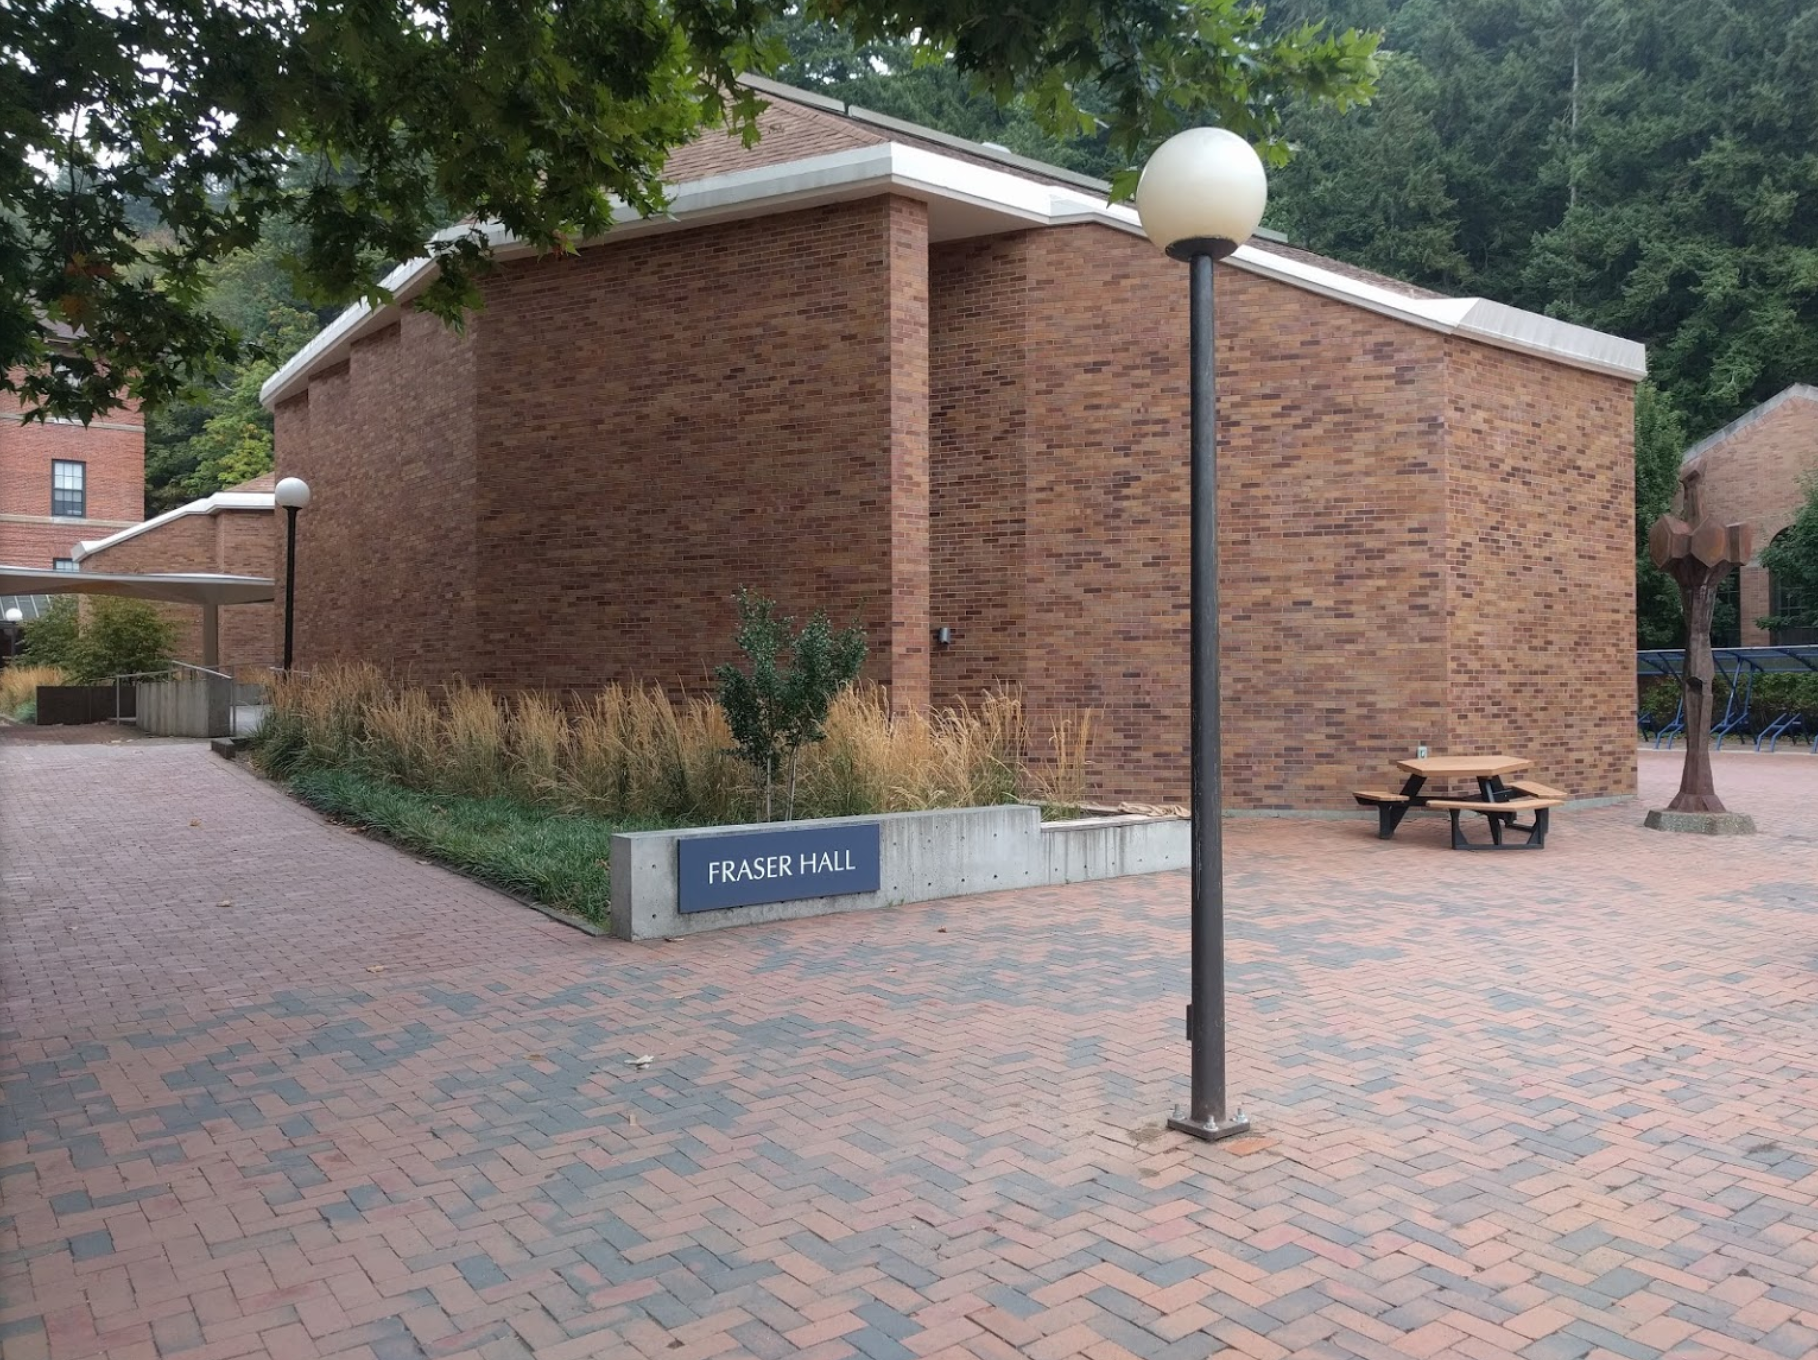 A brick plaza surrounds a blocky brick building with angled corners. A sign reads Fraser Hall. In the background is a fir forest, more brick buildings, a bike rack and an outdoor sculpture.